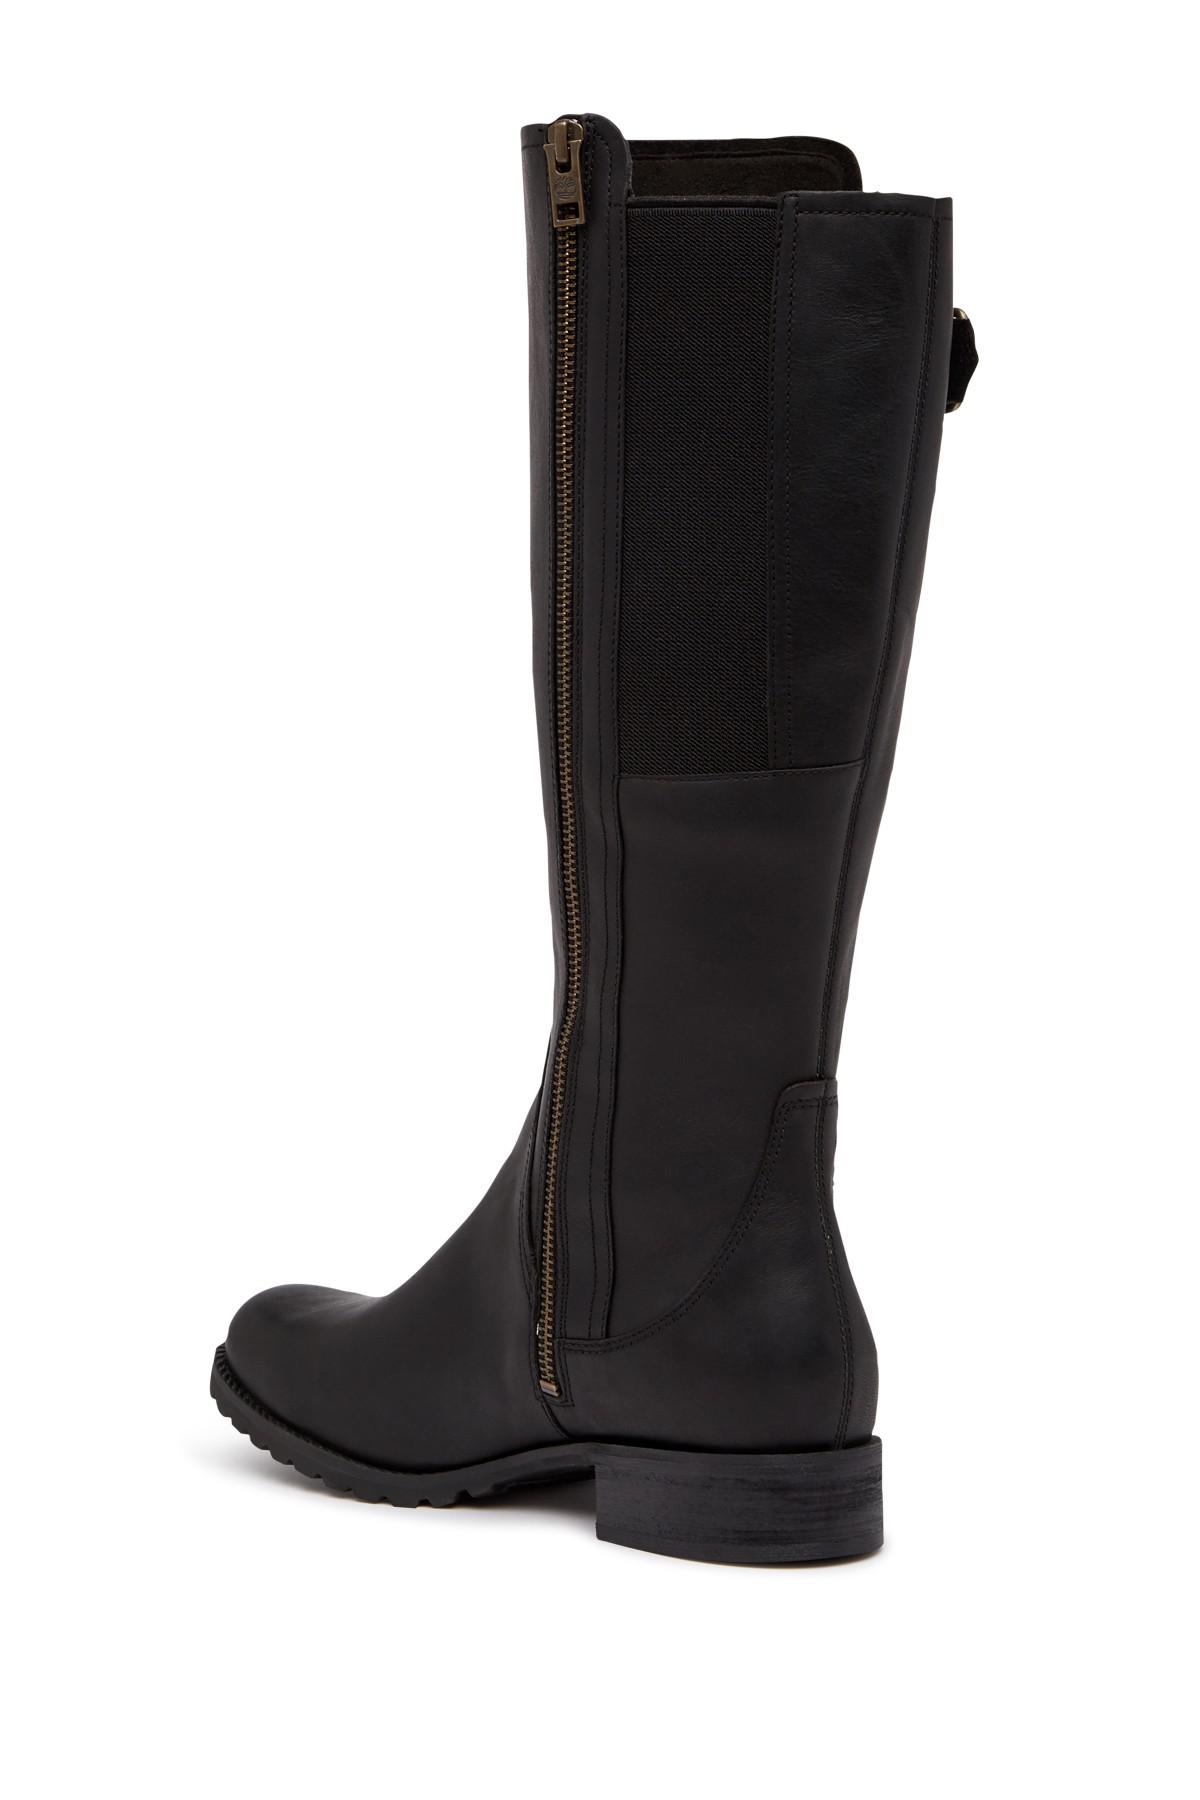 Timberland Banfield Tall Waterproof Leather Boot - Wide Calf in Black - Lyst